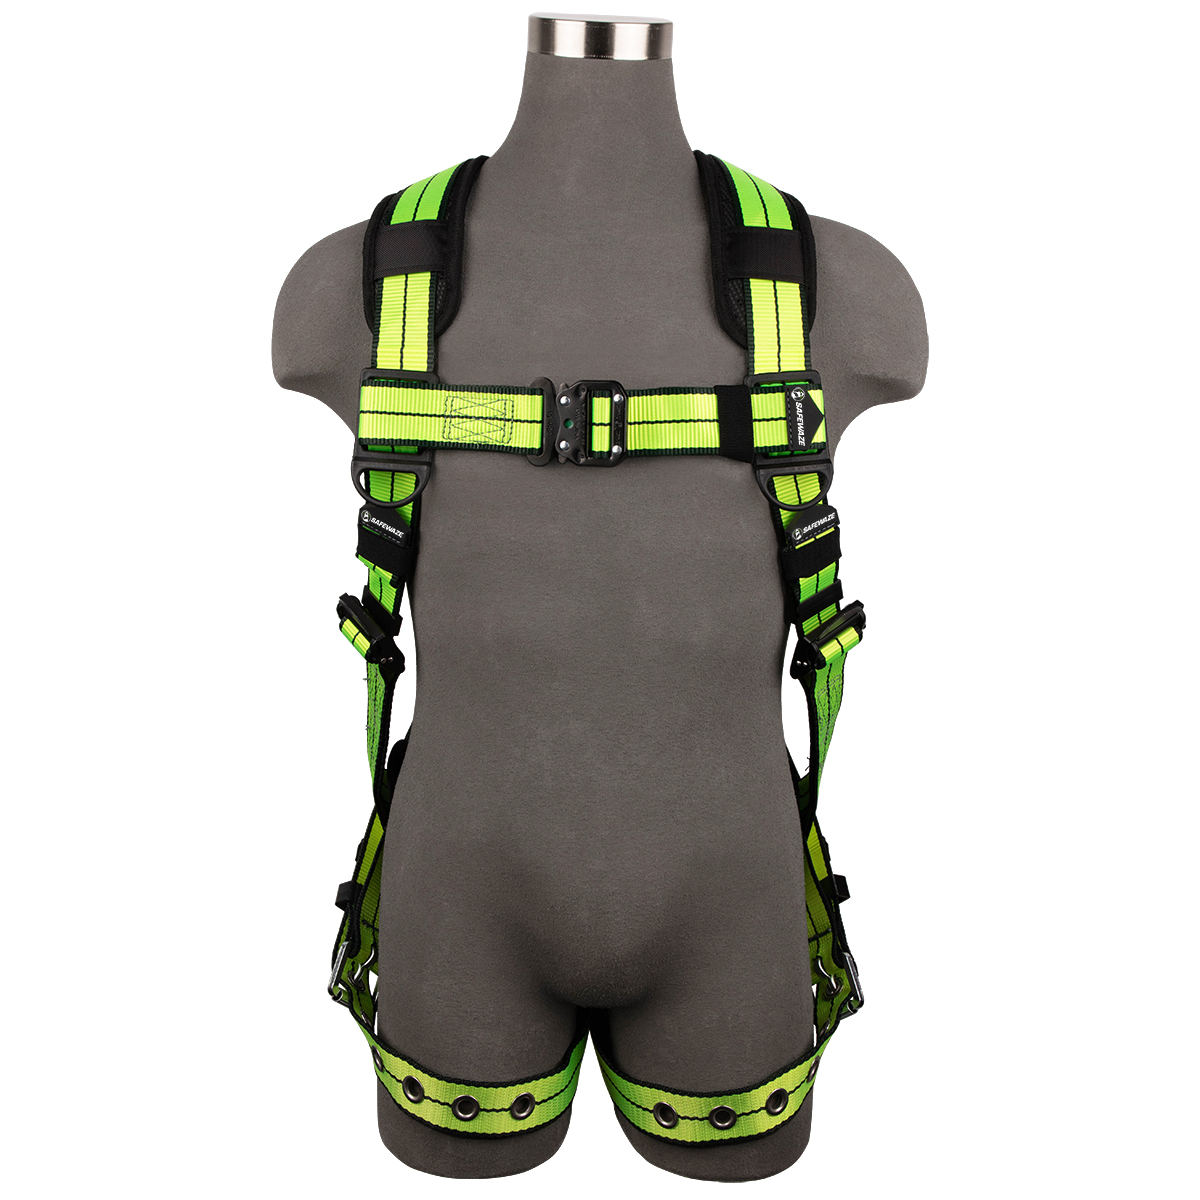 PRO Plus Full Body Harness: 1D, QC Chest, TB Legs - Utility and Pocket Knives